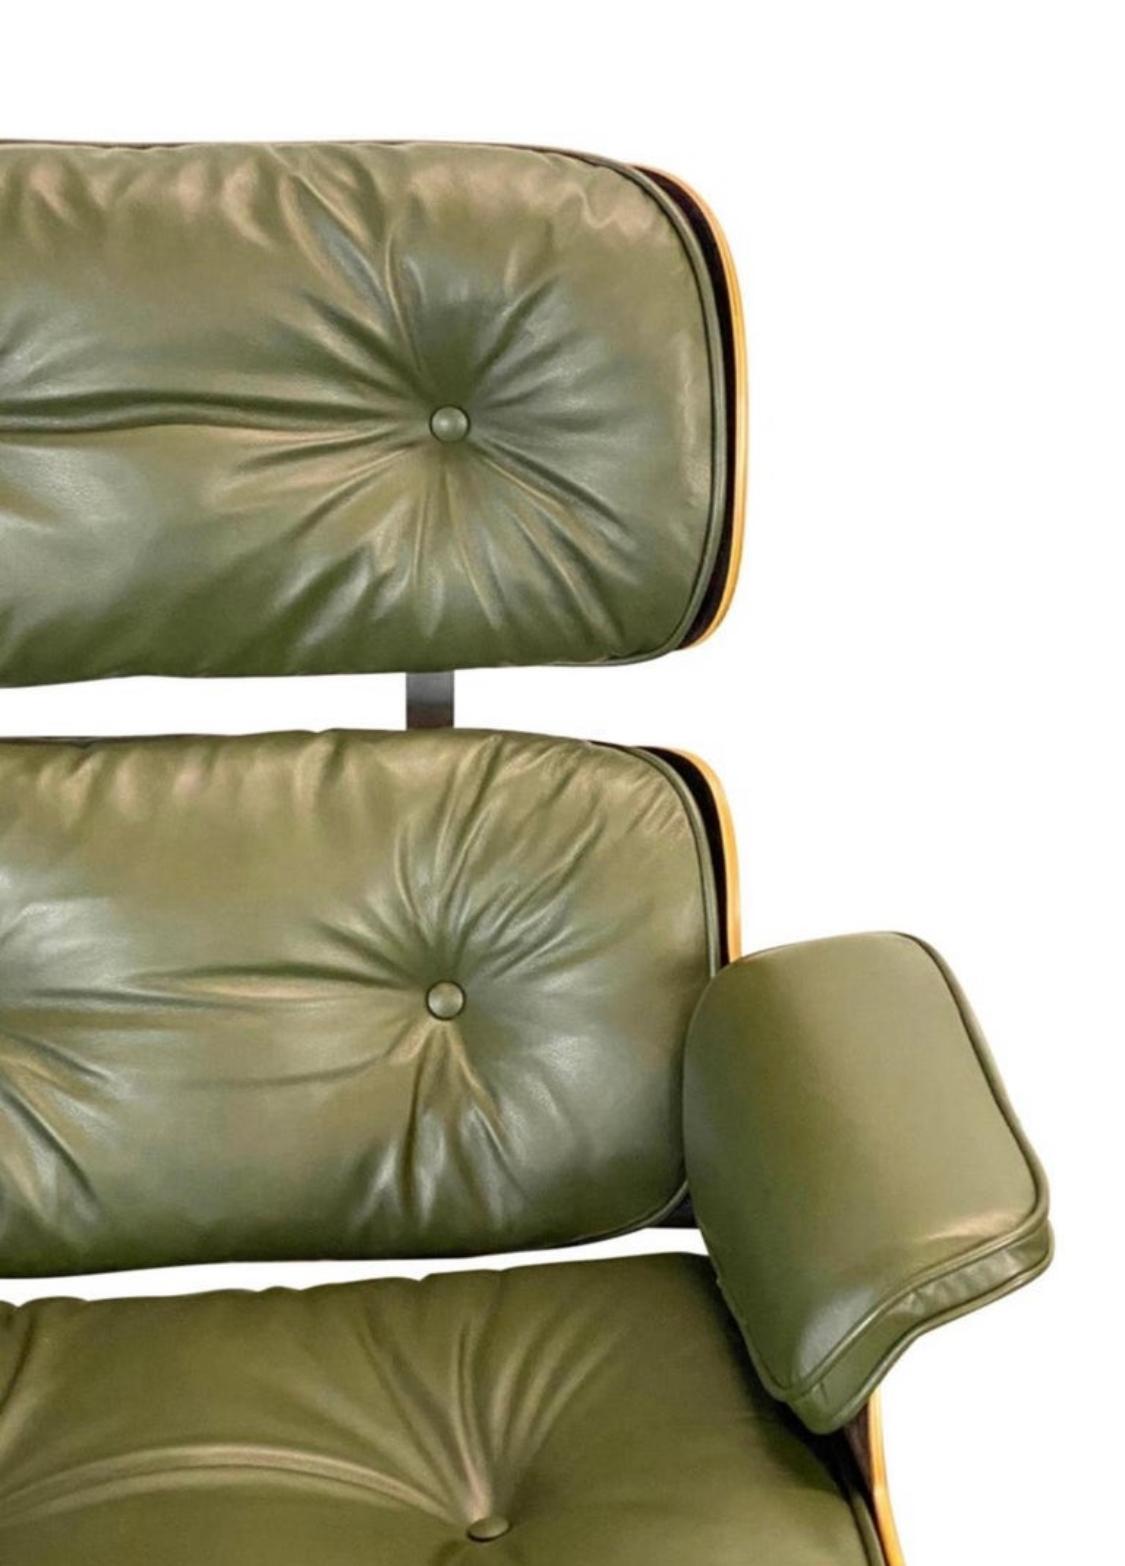 Gorgeous Avocado Eames Lounge Chair and Ottoman For Sale 2